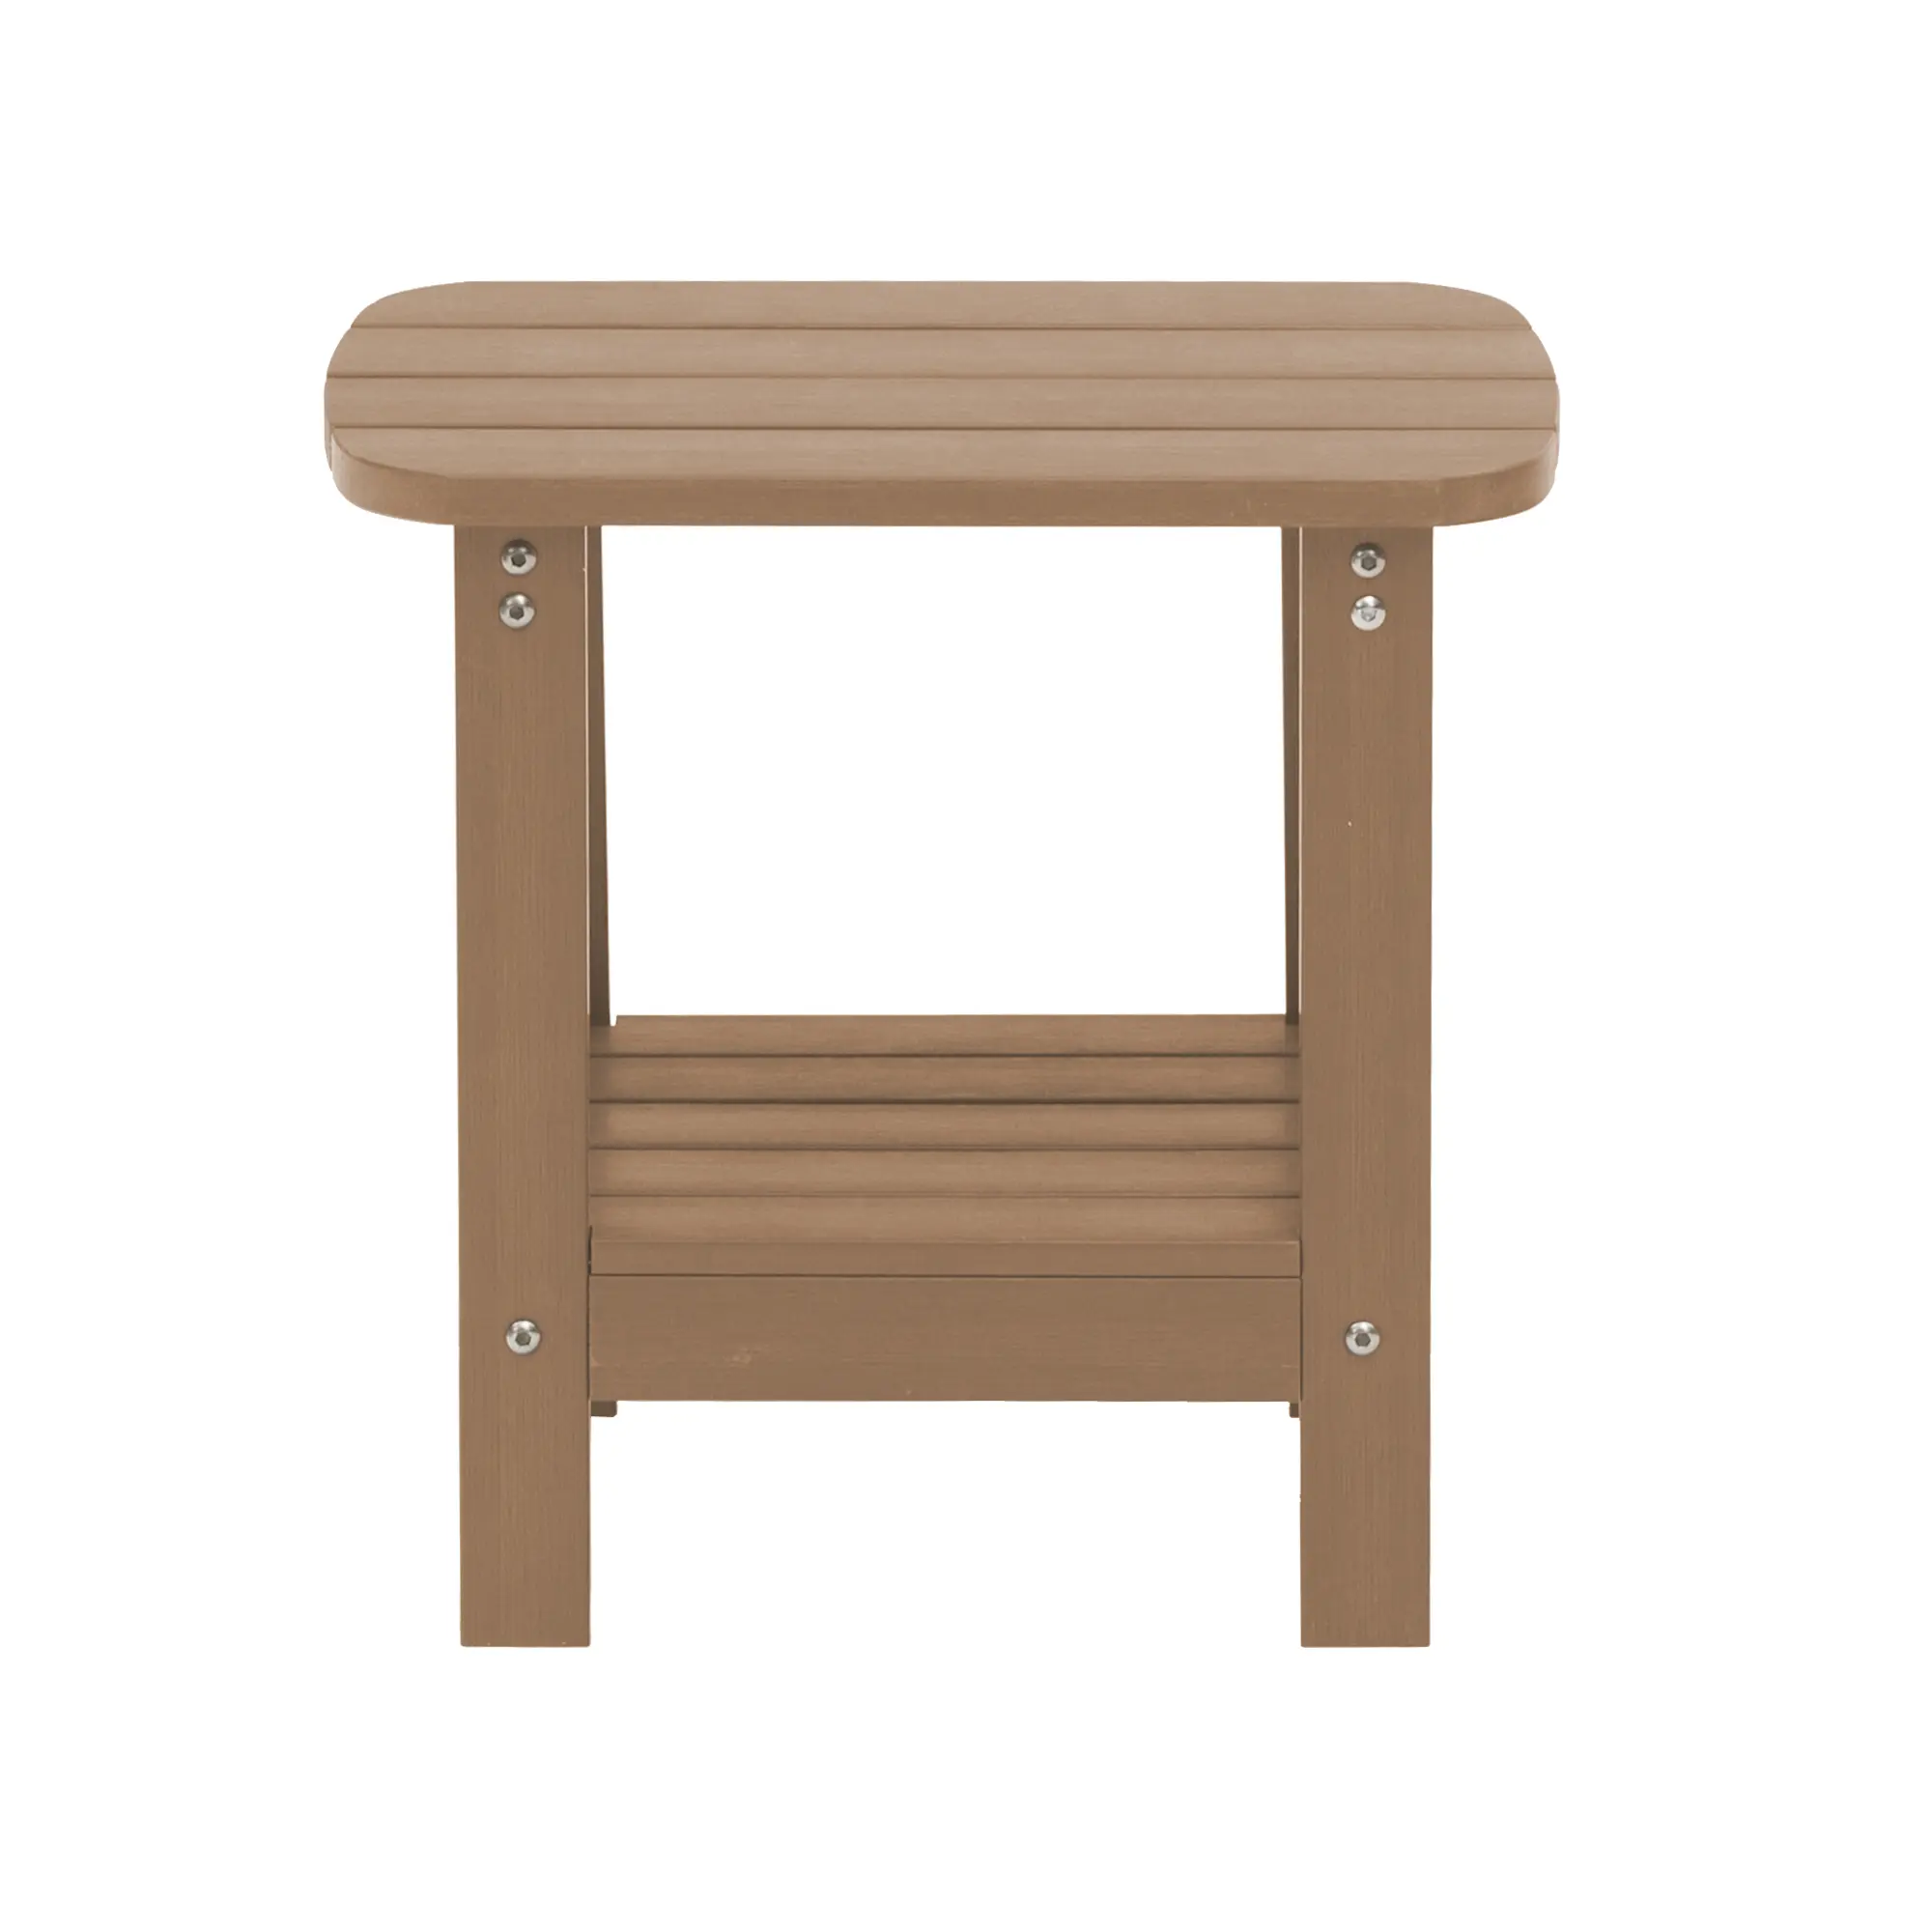 2-Tier Composite End Table for Patio For Outdoor And Indoor